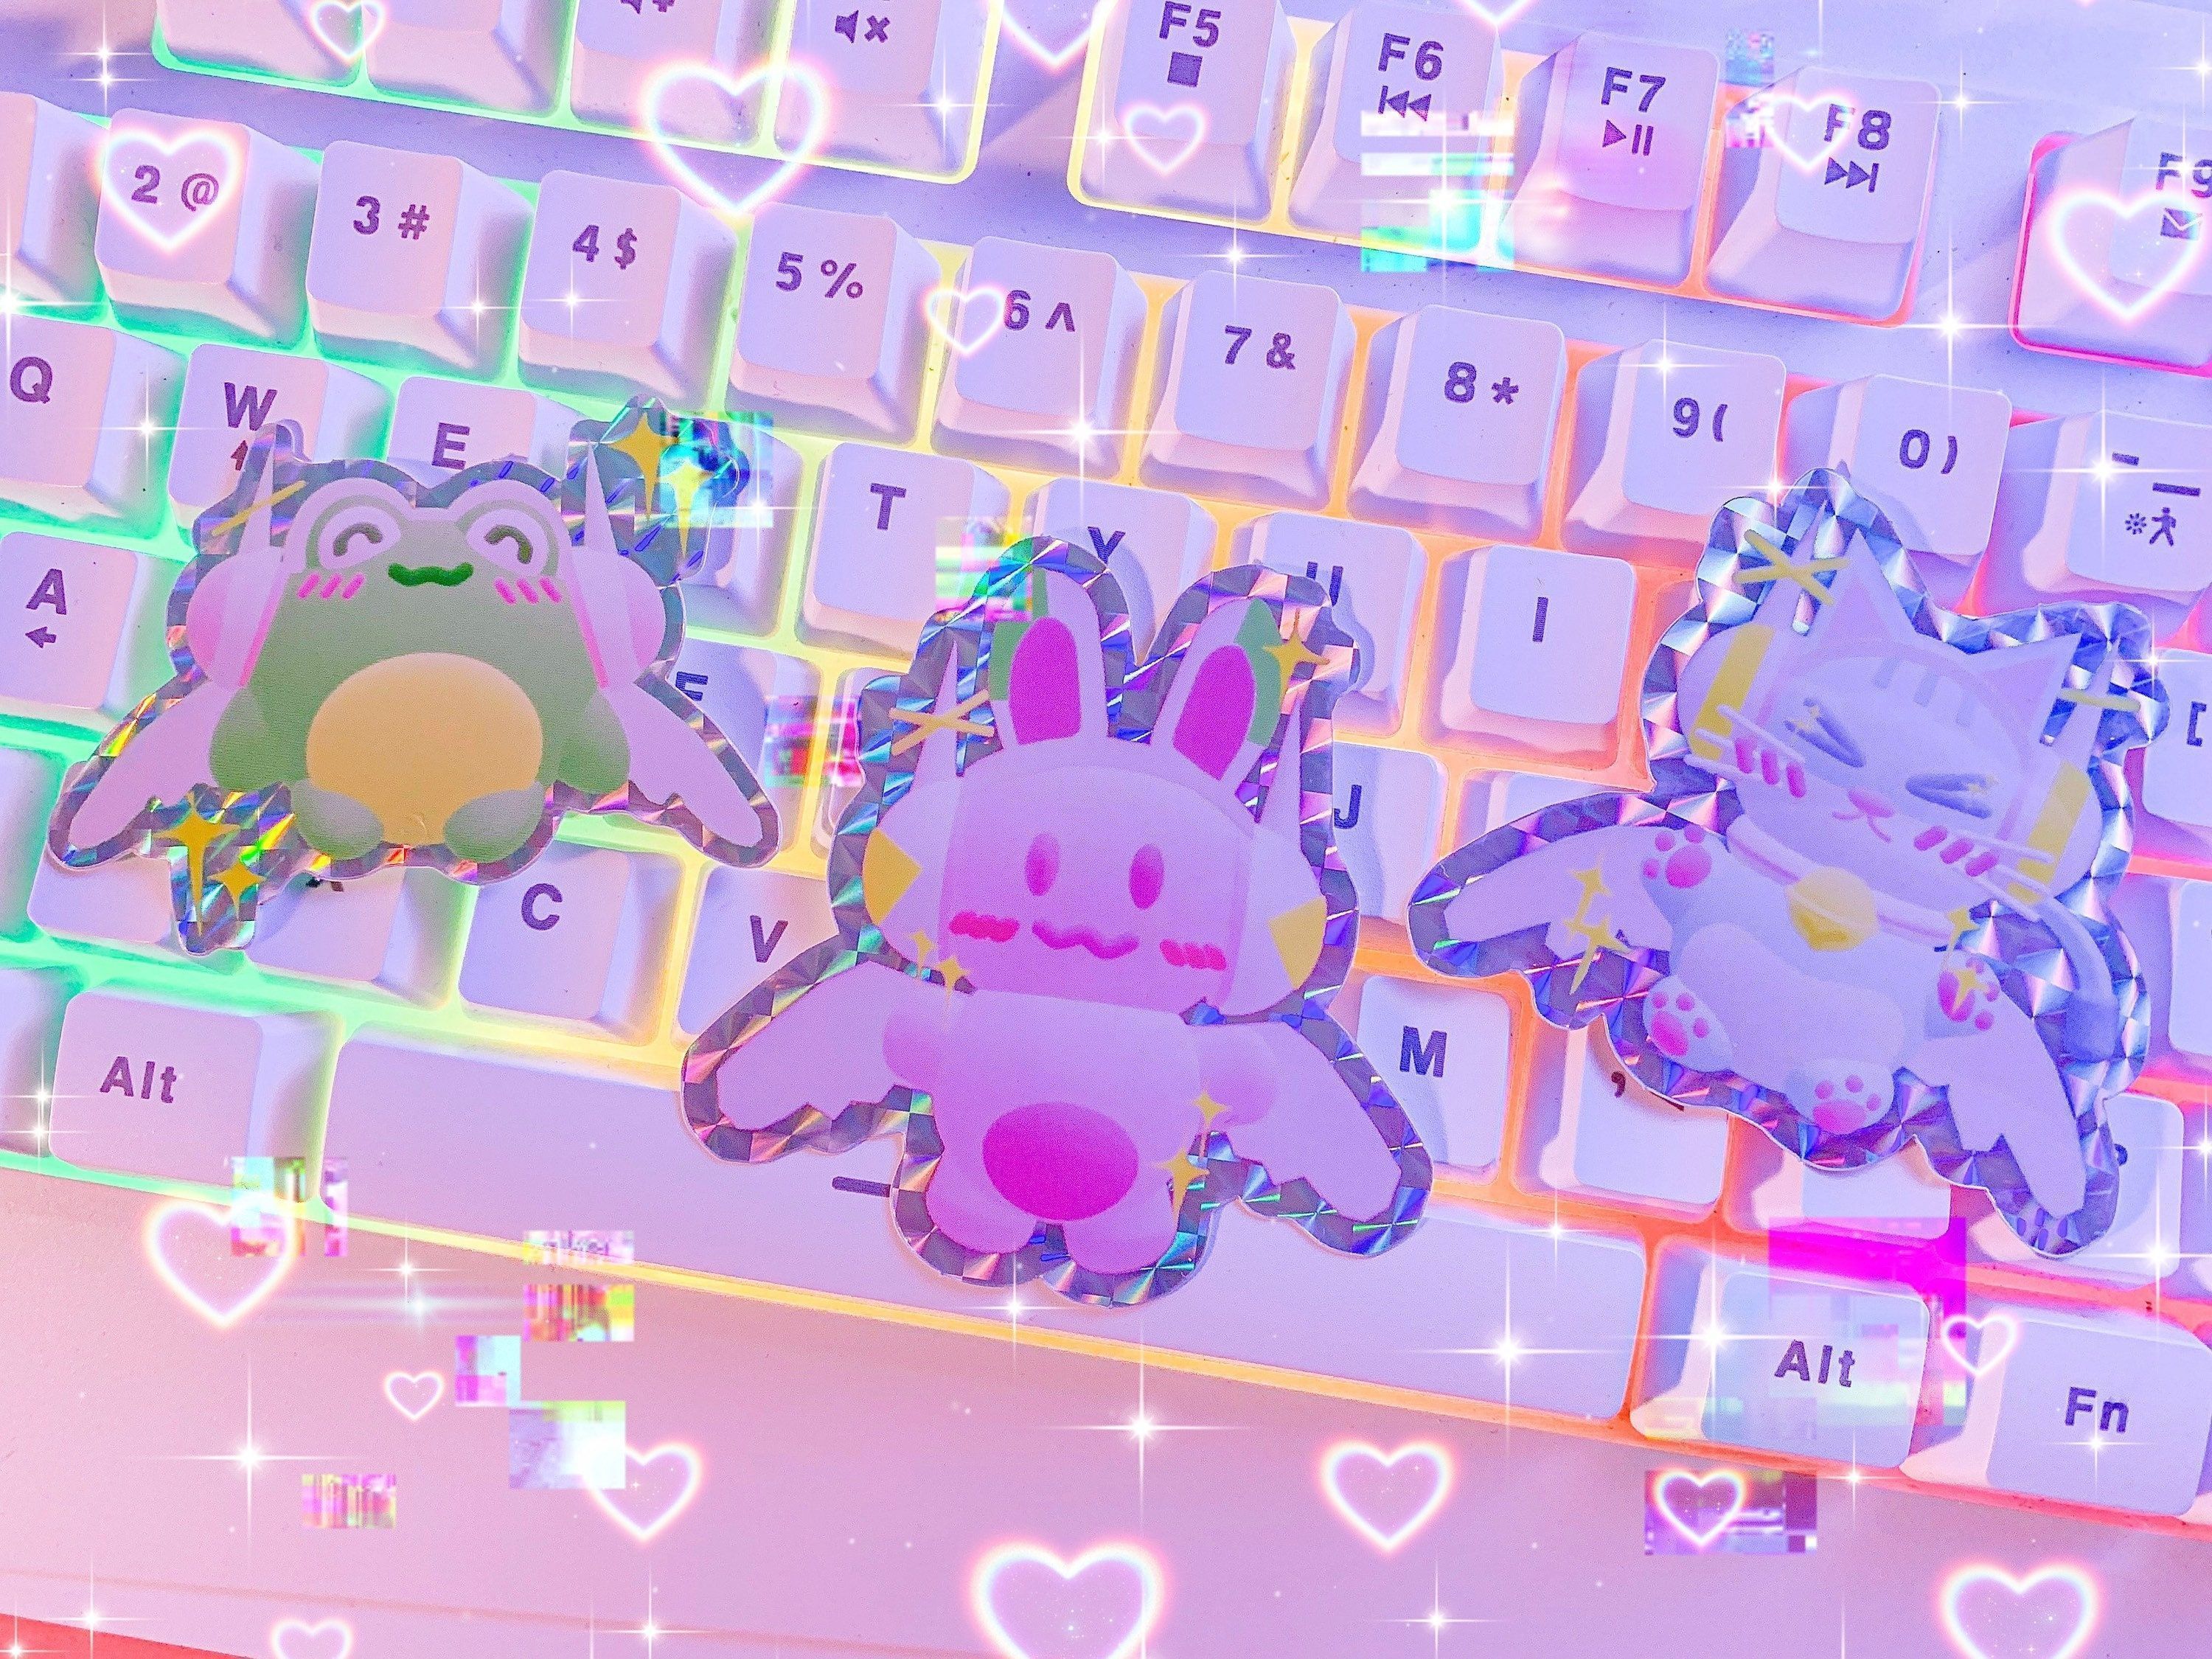 Acrylic keychains of a frog, a bunny, and a cat sitting on a keyboard. - Webcore, animecore, Internetcore